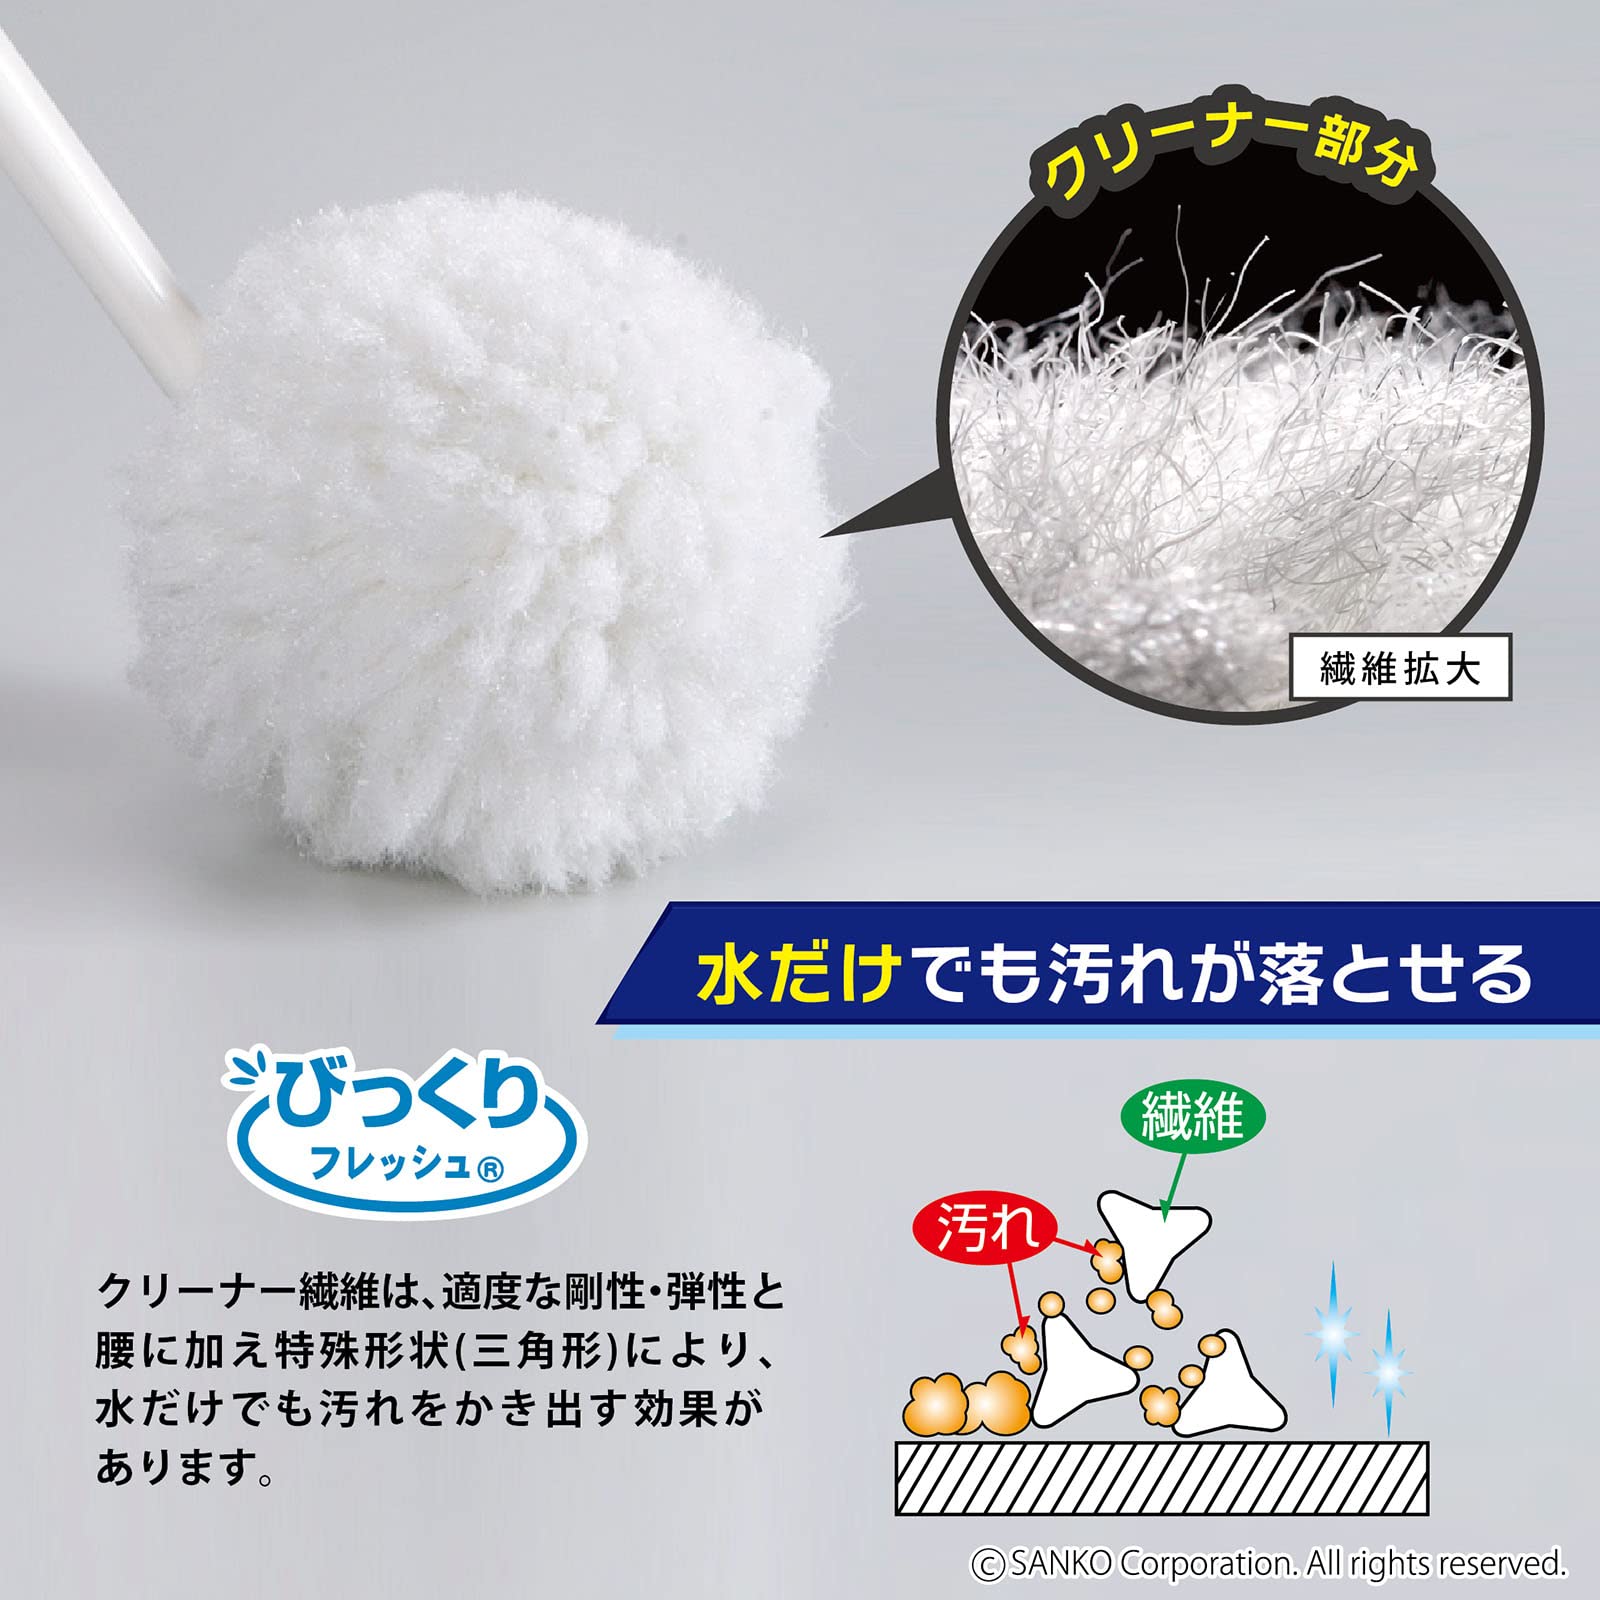 Sanko sun ko- soft toilet brush case attaching water only also dirt ..... special fiber scratch . attaching difficult regular white surprised fresh day book